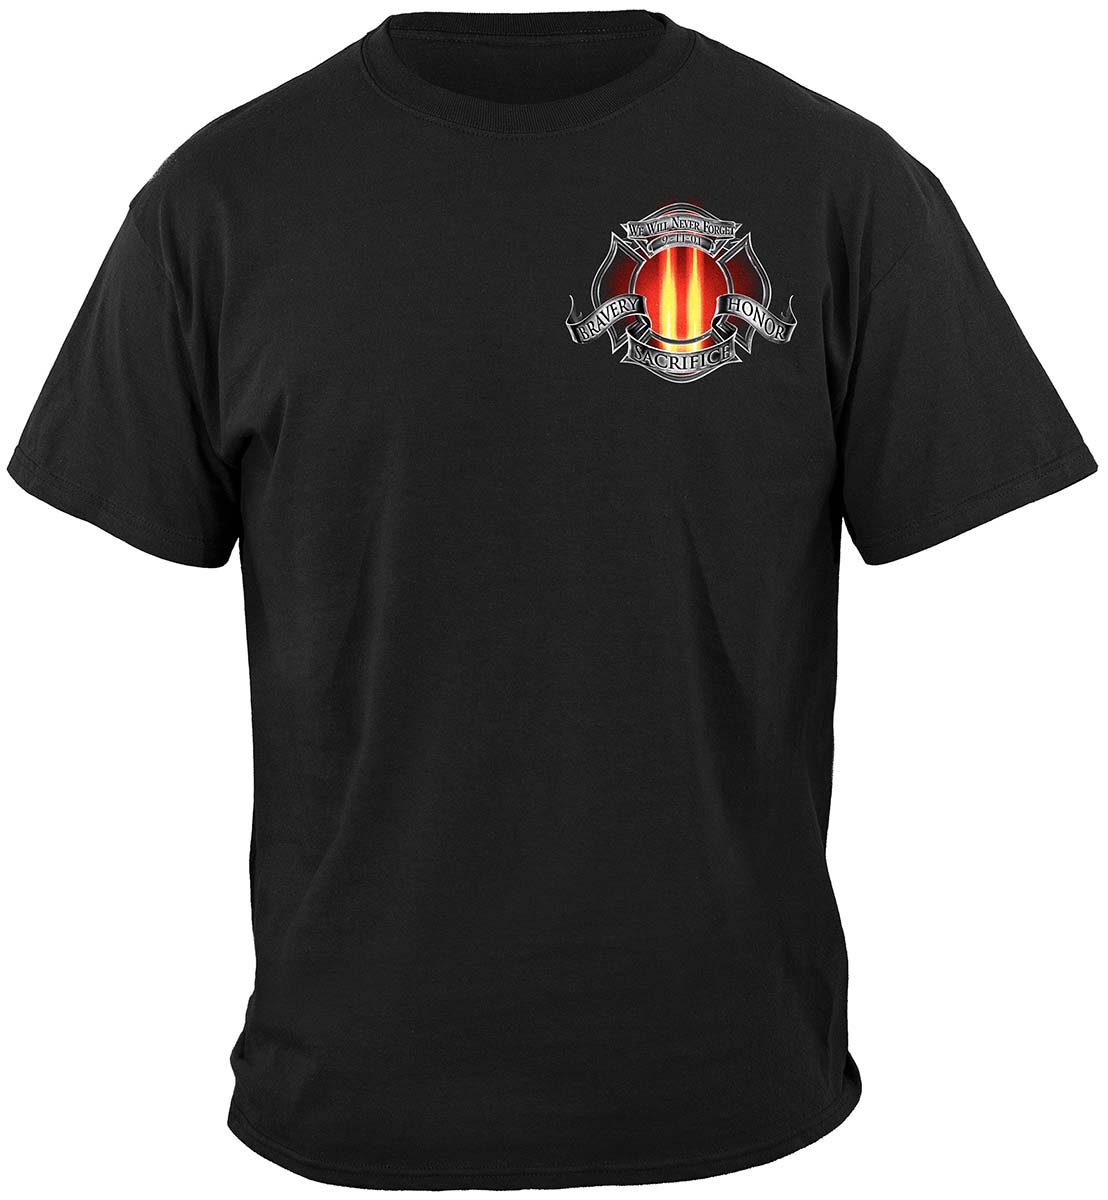 Red Tribute High Honor Firefighter Premium T-Shirt